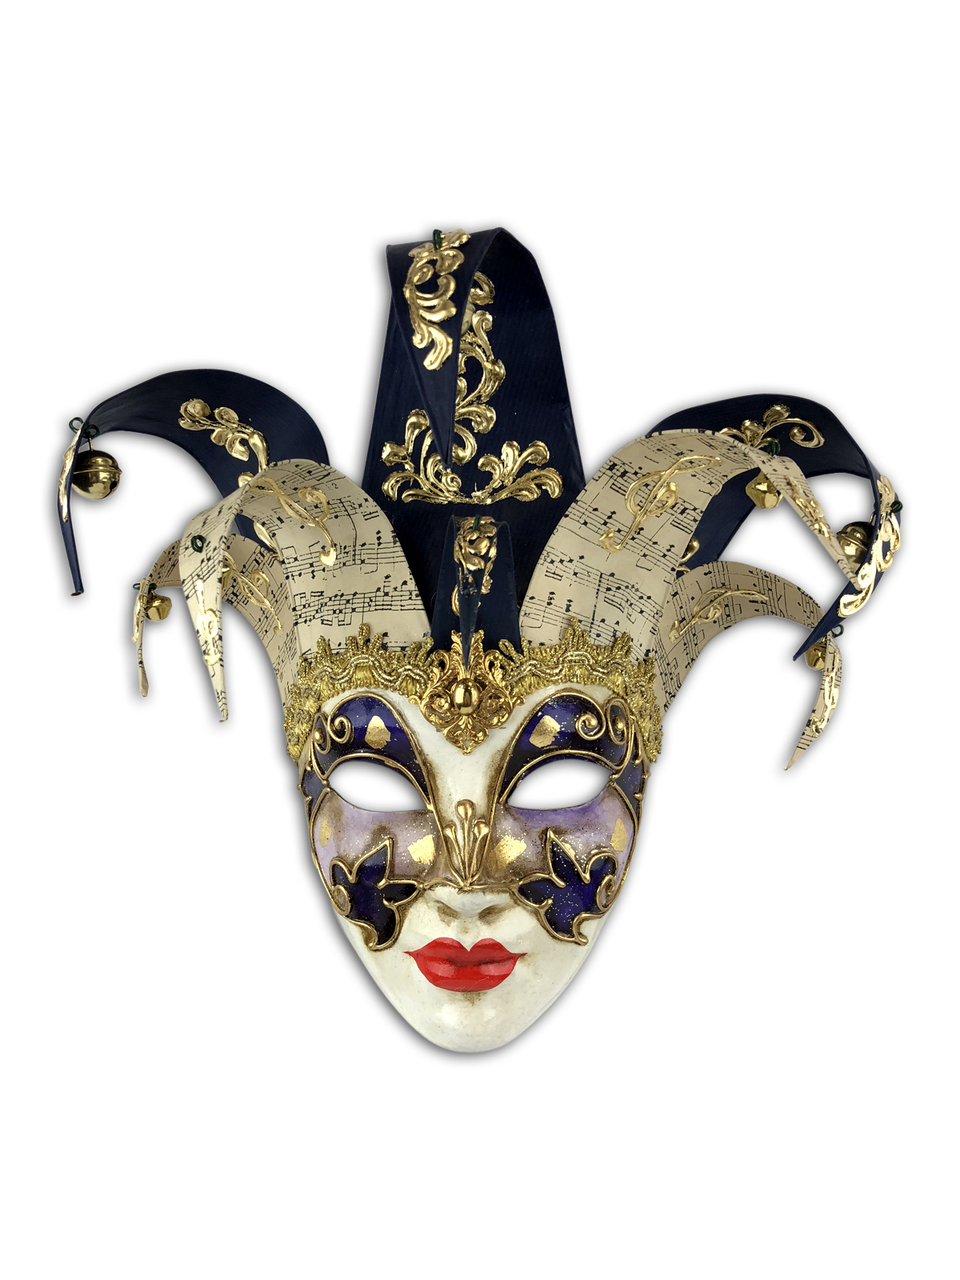 Authentic Venetian Mask Jolly Alba For Sale From Us Retailer